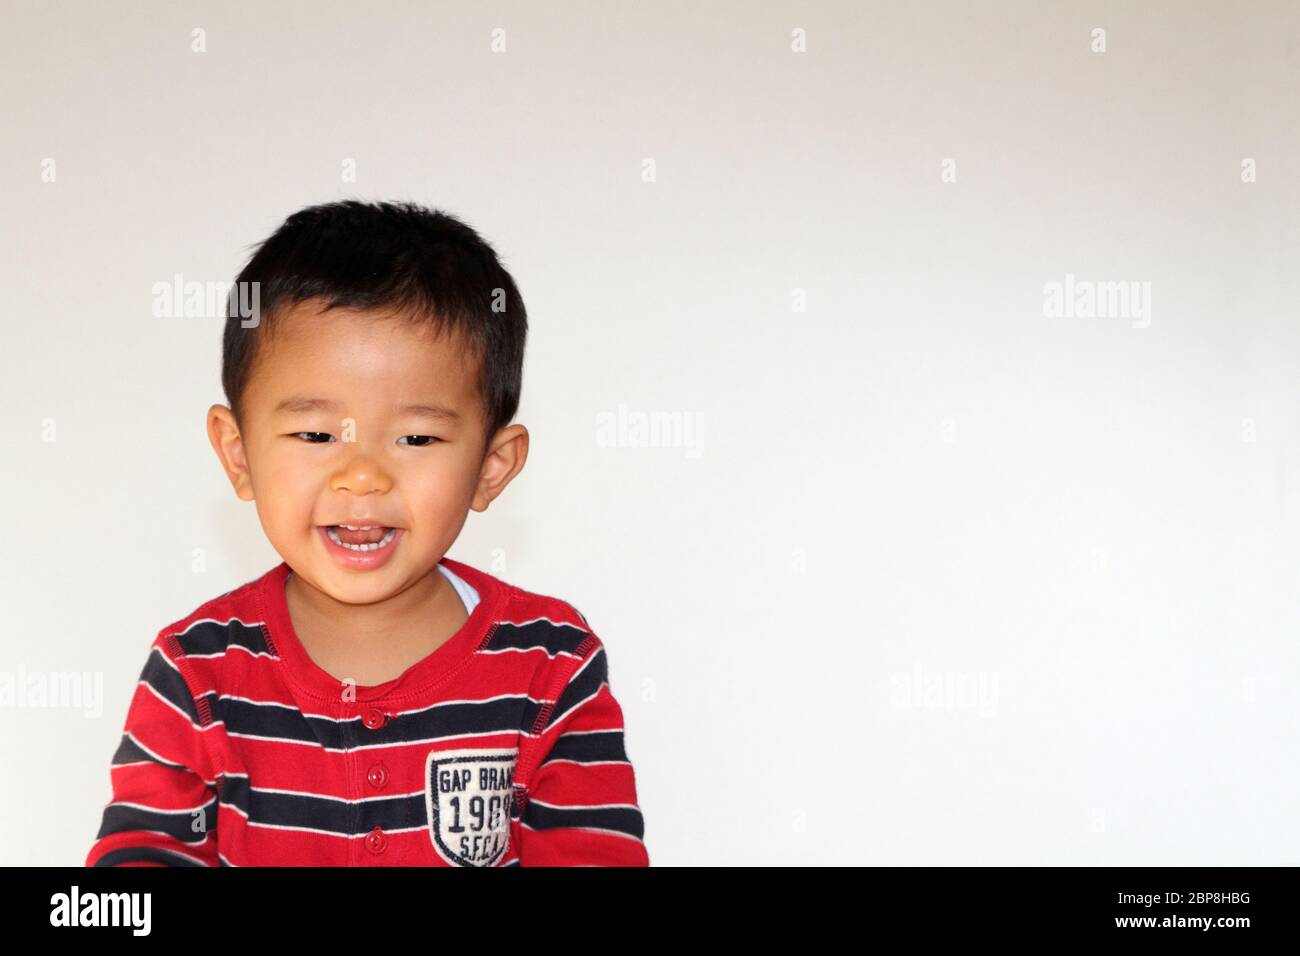 A 6 year old Japanese American boy … – License image – 71179249 ❘ lookphotos